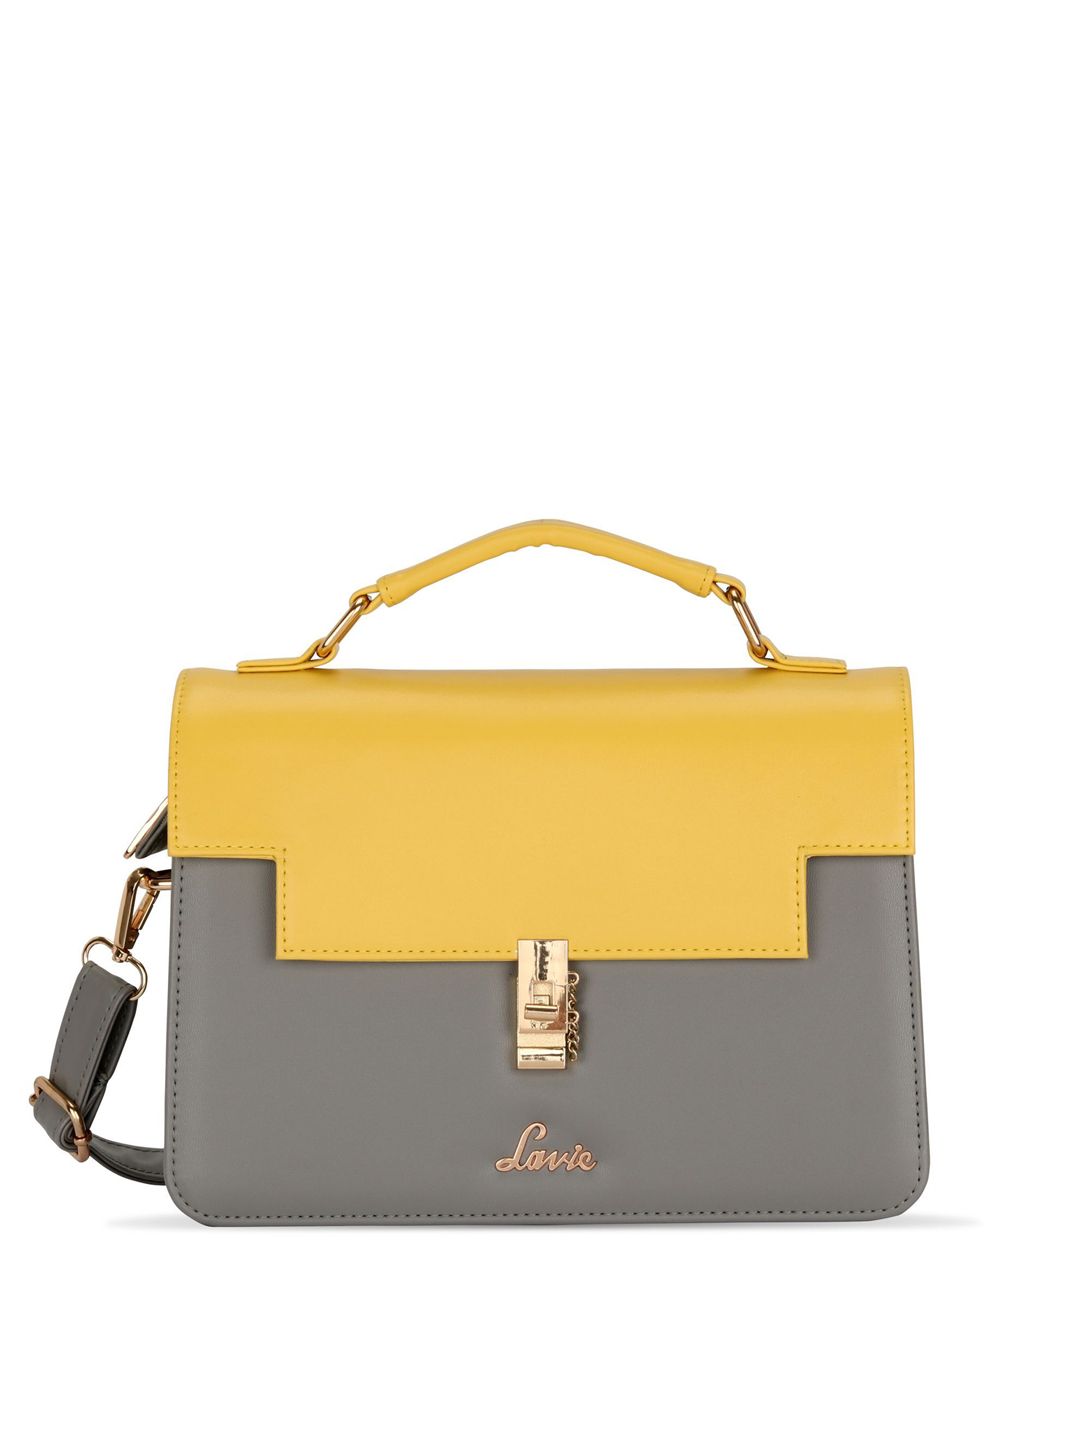 Lavie Grey & Yellow Colourblocked Structured Satchel Bag Price in India